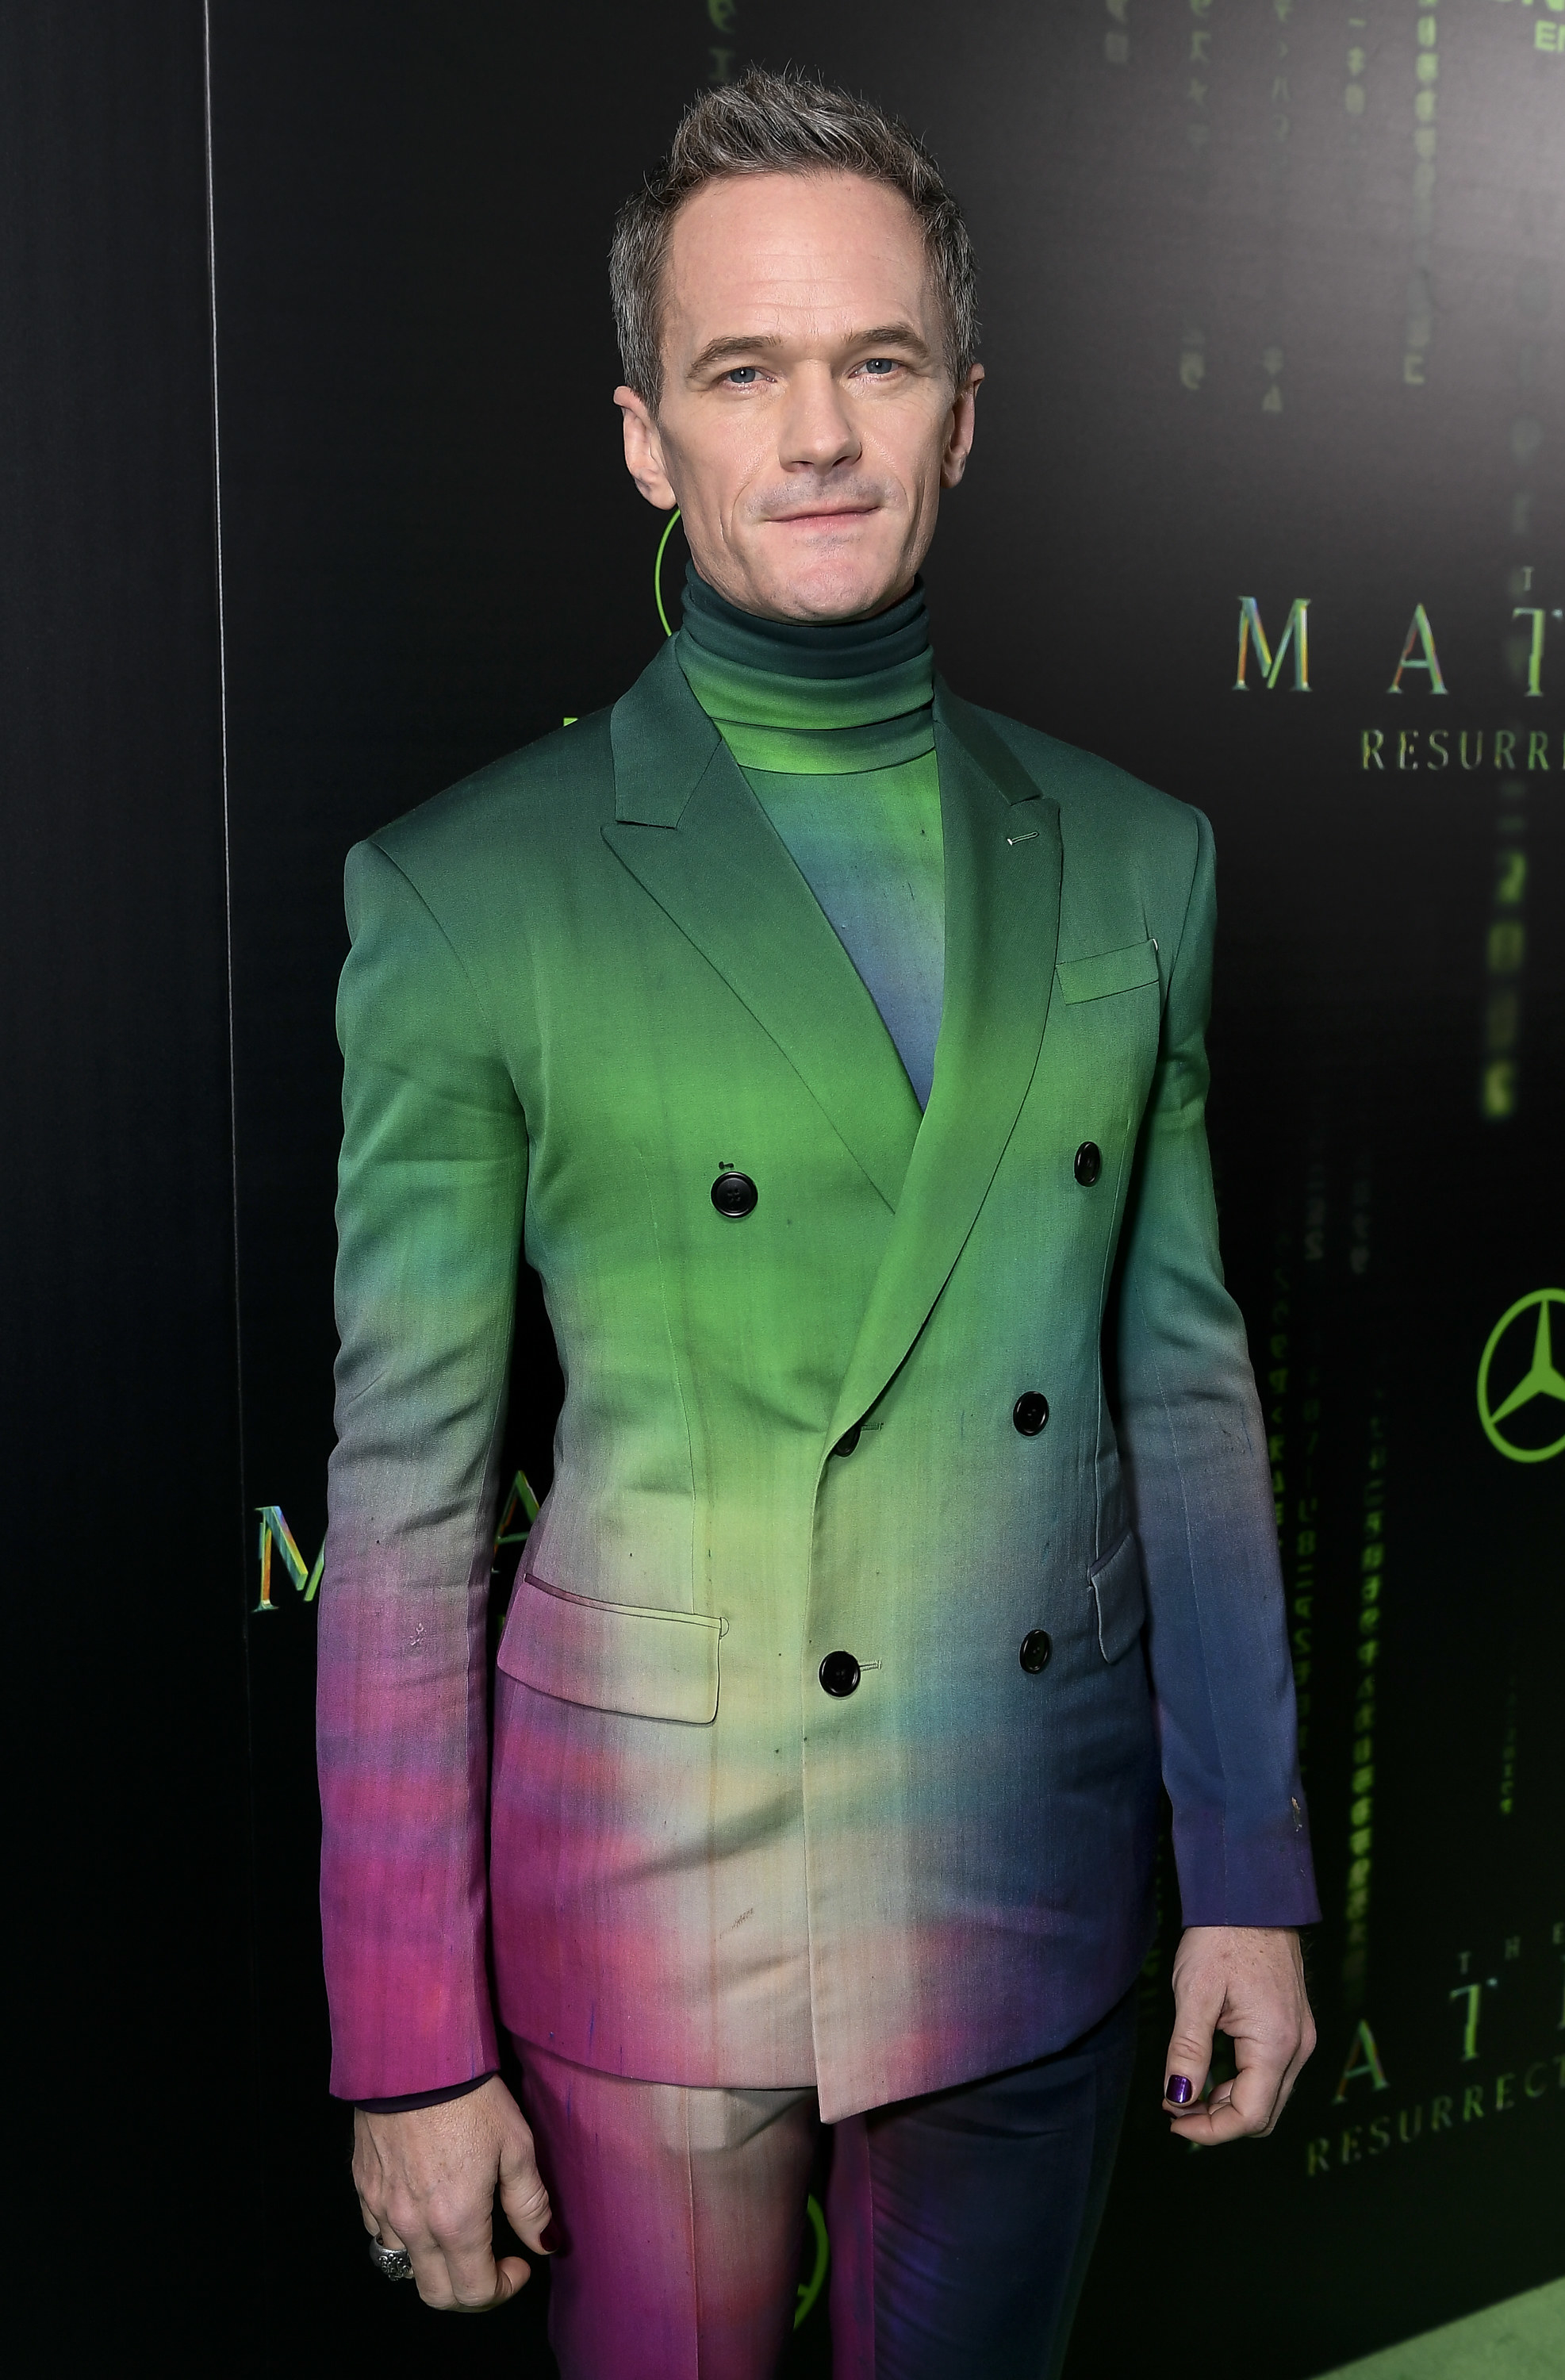 Neil wears a suit that is traditional in fit, but is a gradient from green to purple, with a matching green gradient high-neck top underneath